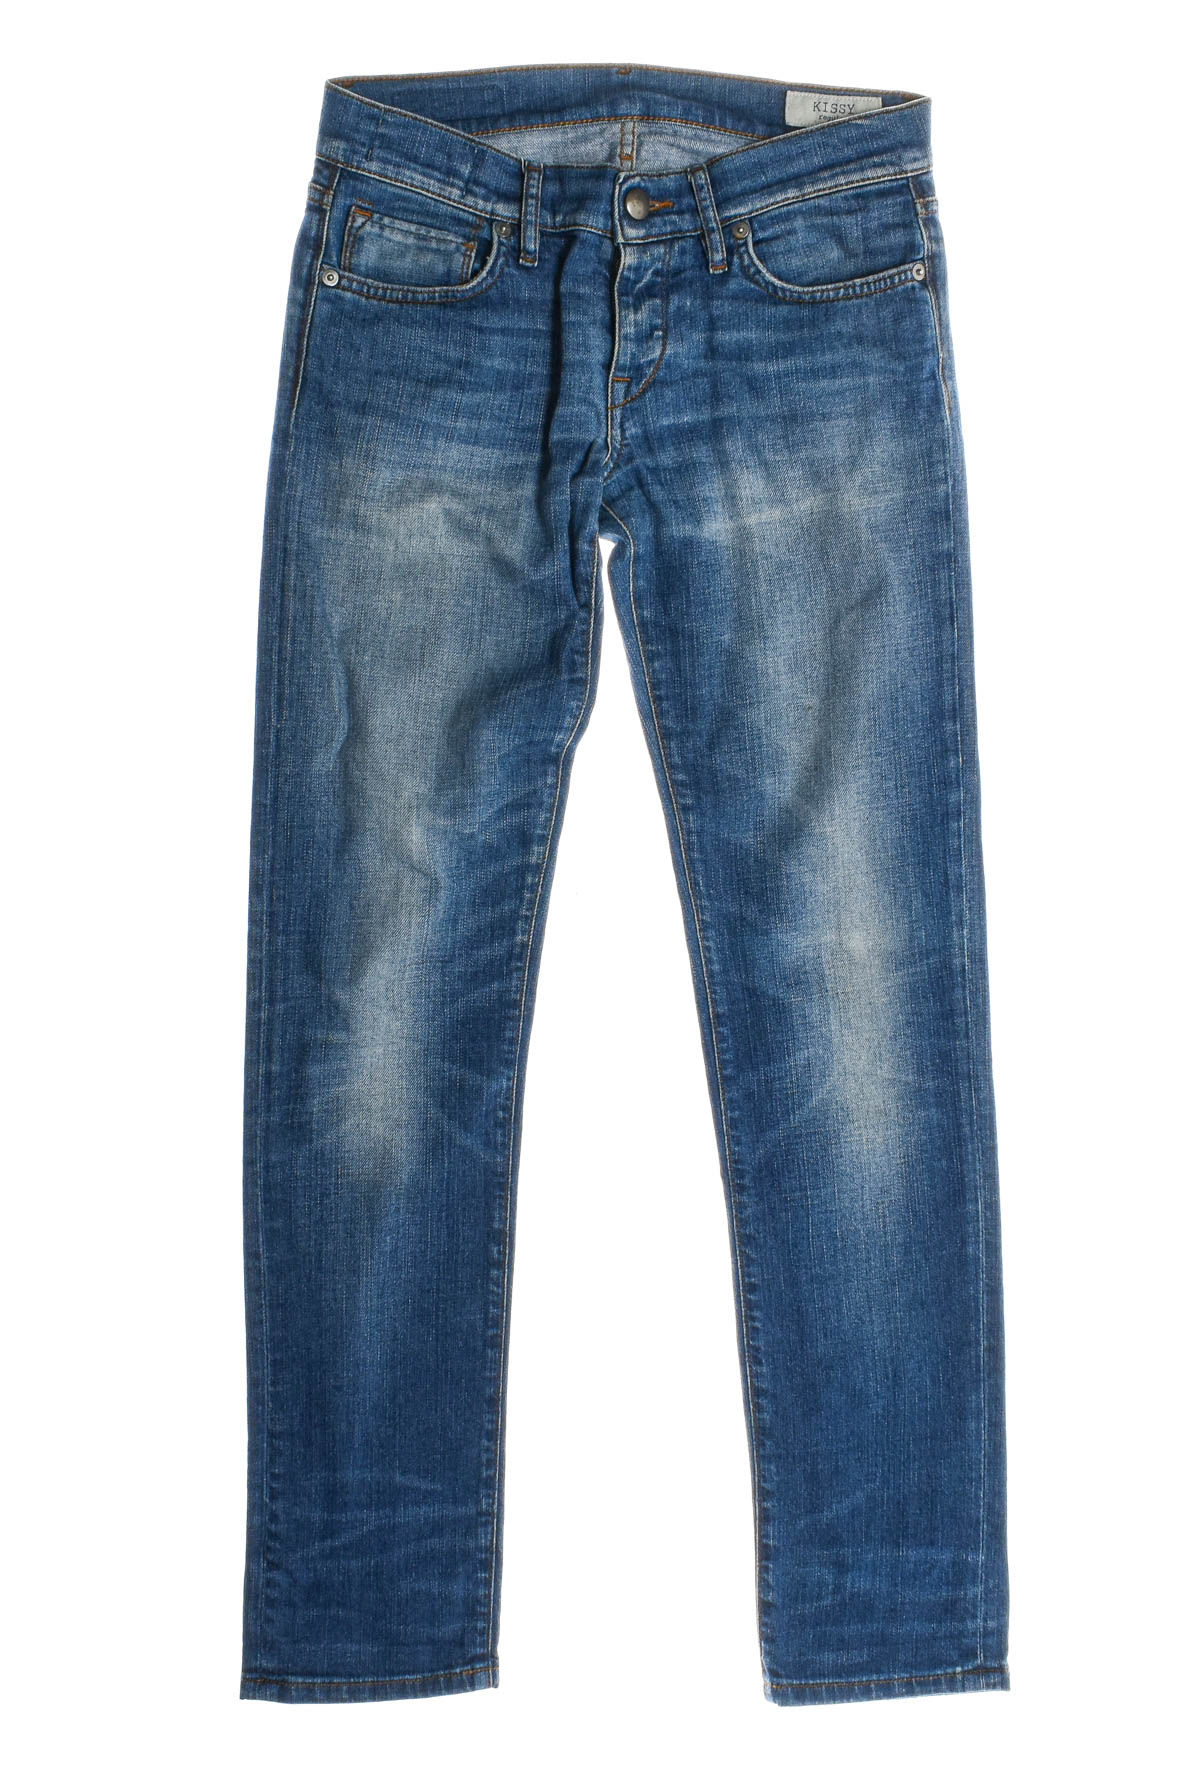 Women's jeans - Mauro Grifoni - 0